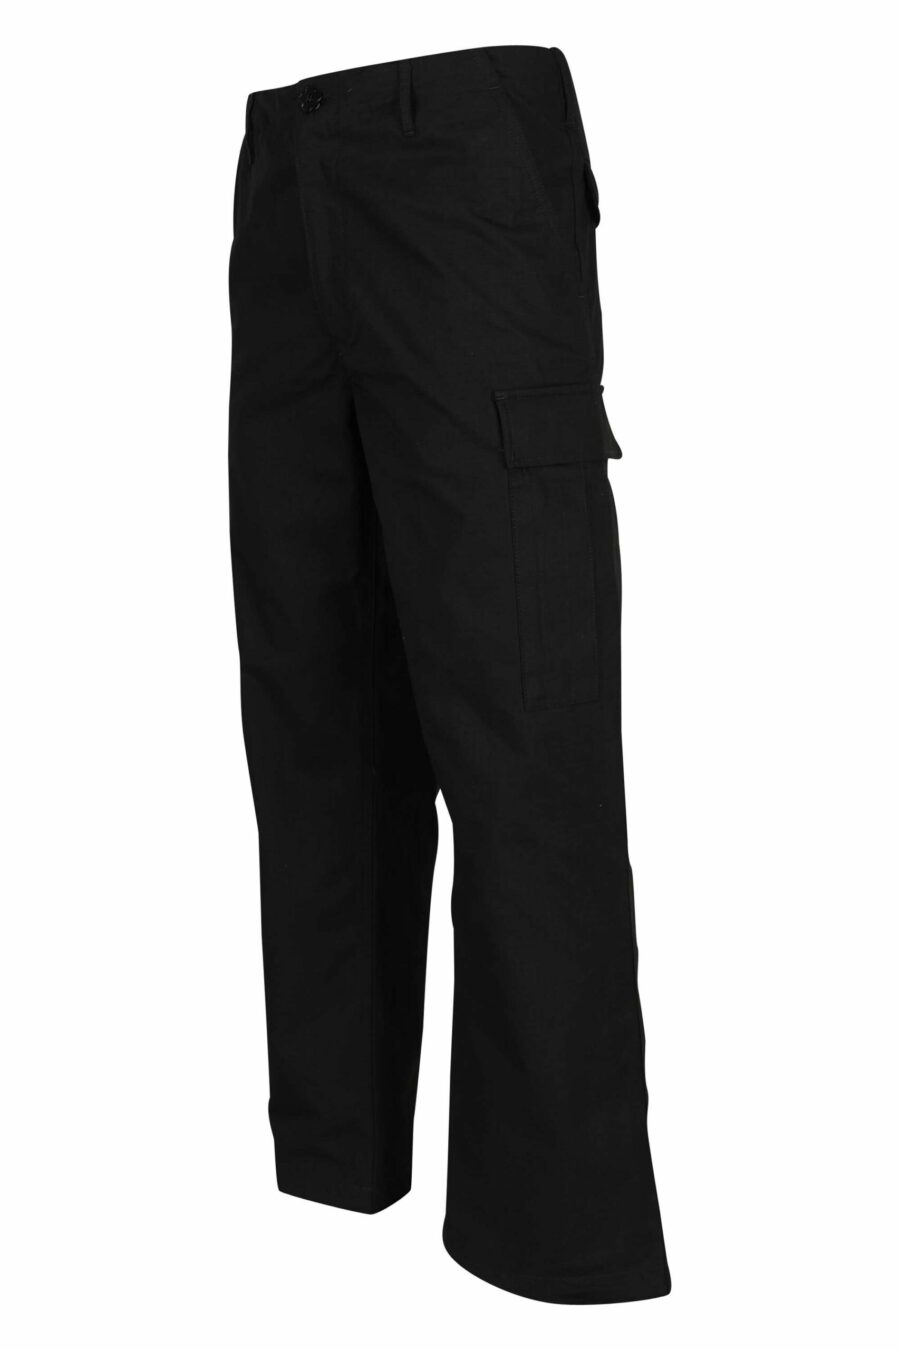 Black cargo trousers with "boke flower" logo - 3612230618855 1 scaled